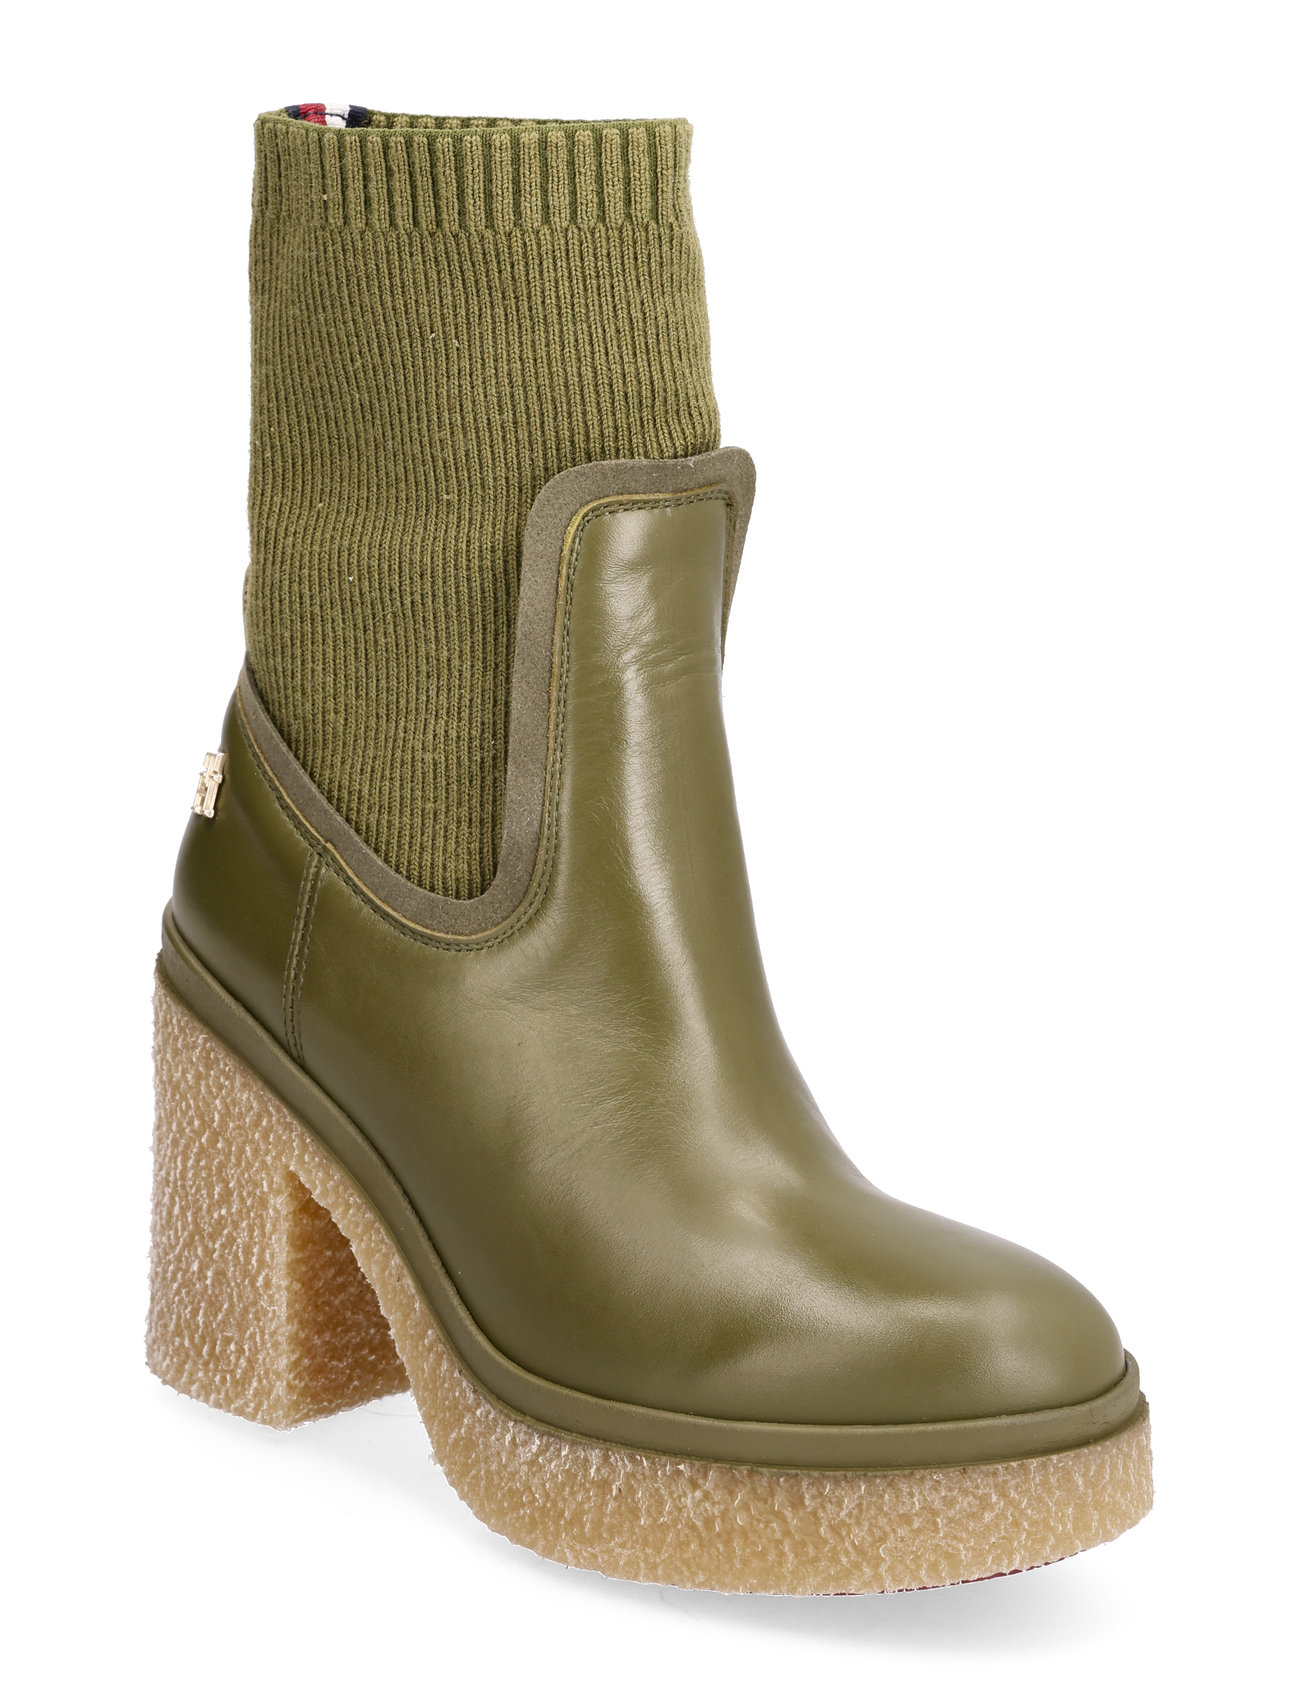 Plateau Crepe Look Sockboot Shoes Boots Ankle Boots Ankle Boots With Heel Green Tommy Hilfiger